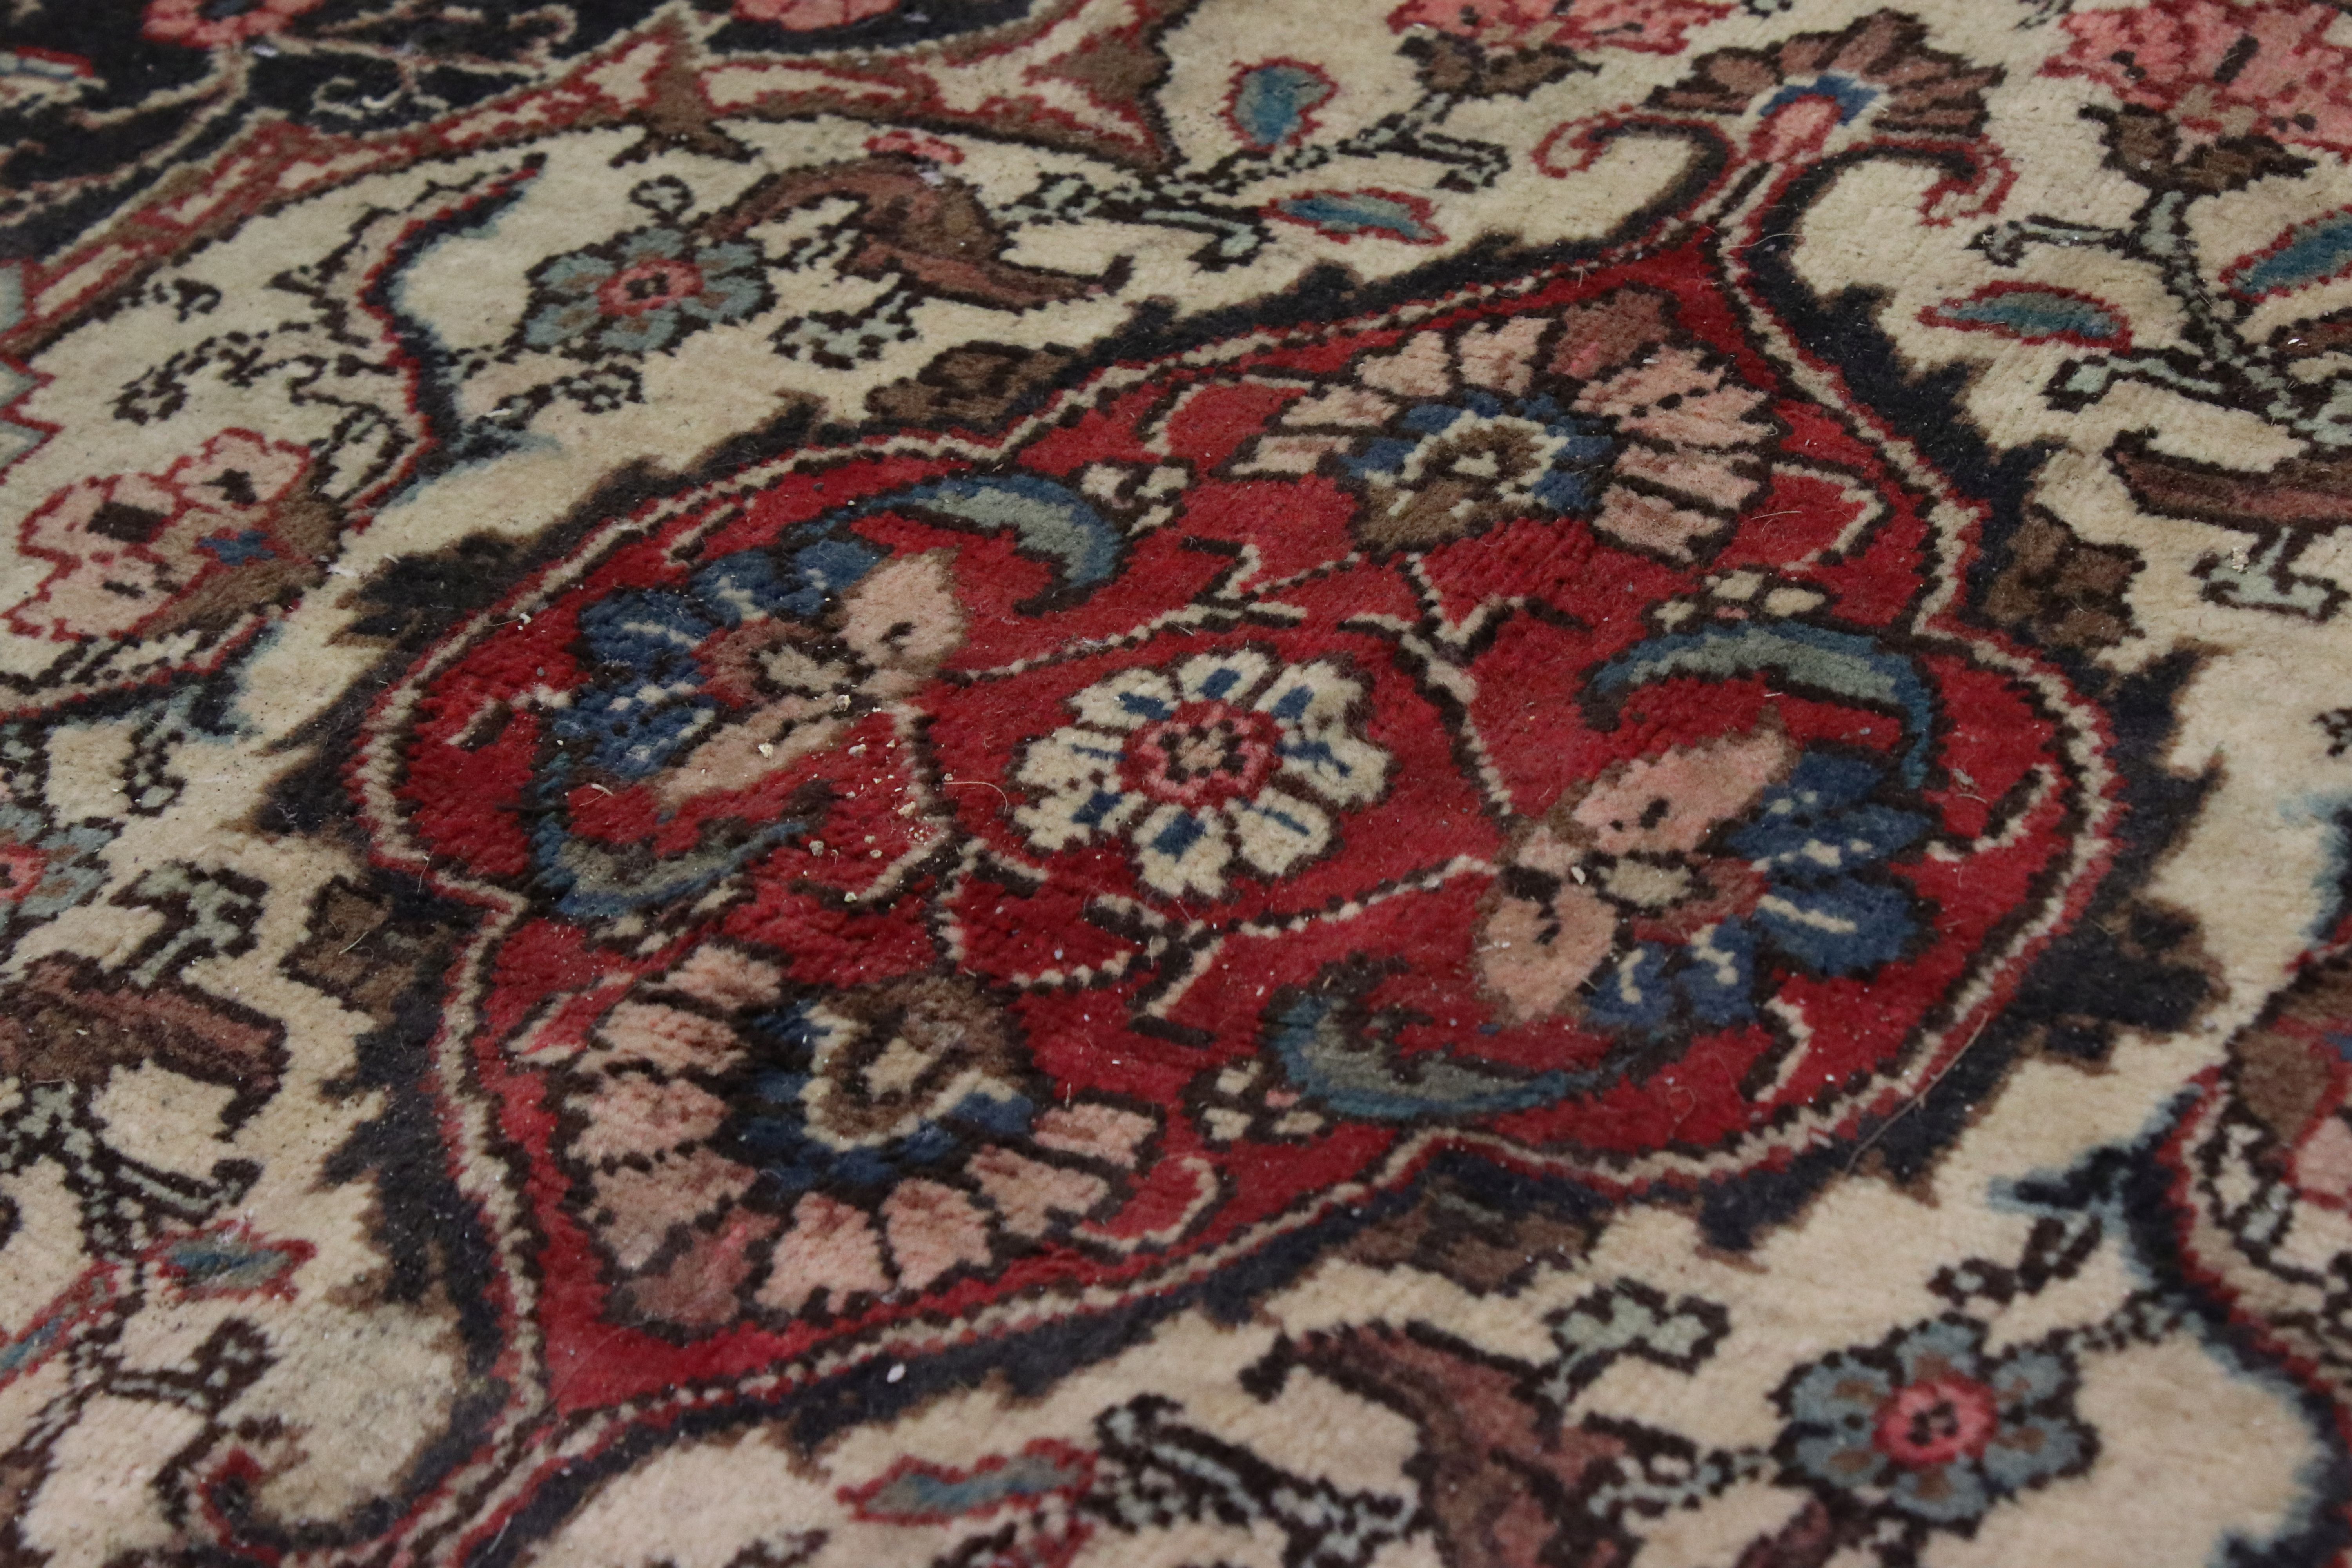 Large Wool Red Ground Rug with floral pattern within a border, 279cms x 396cms - Image 5 of 10